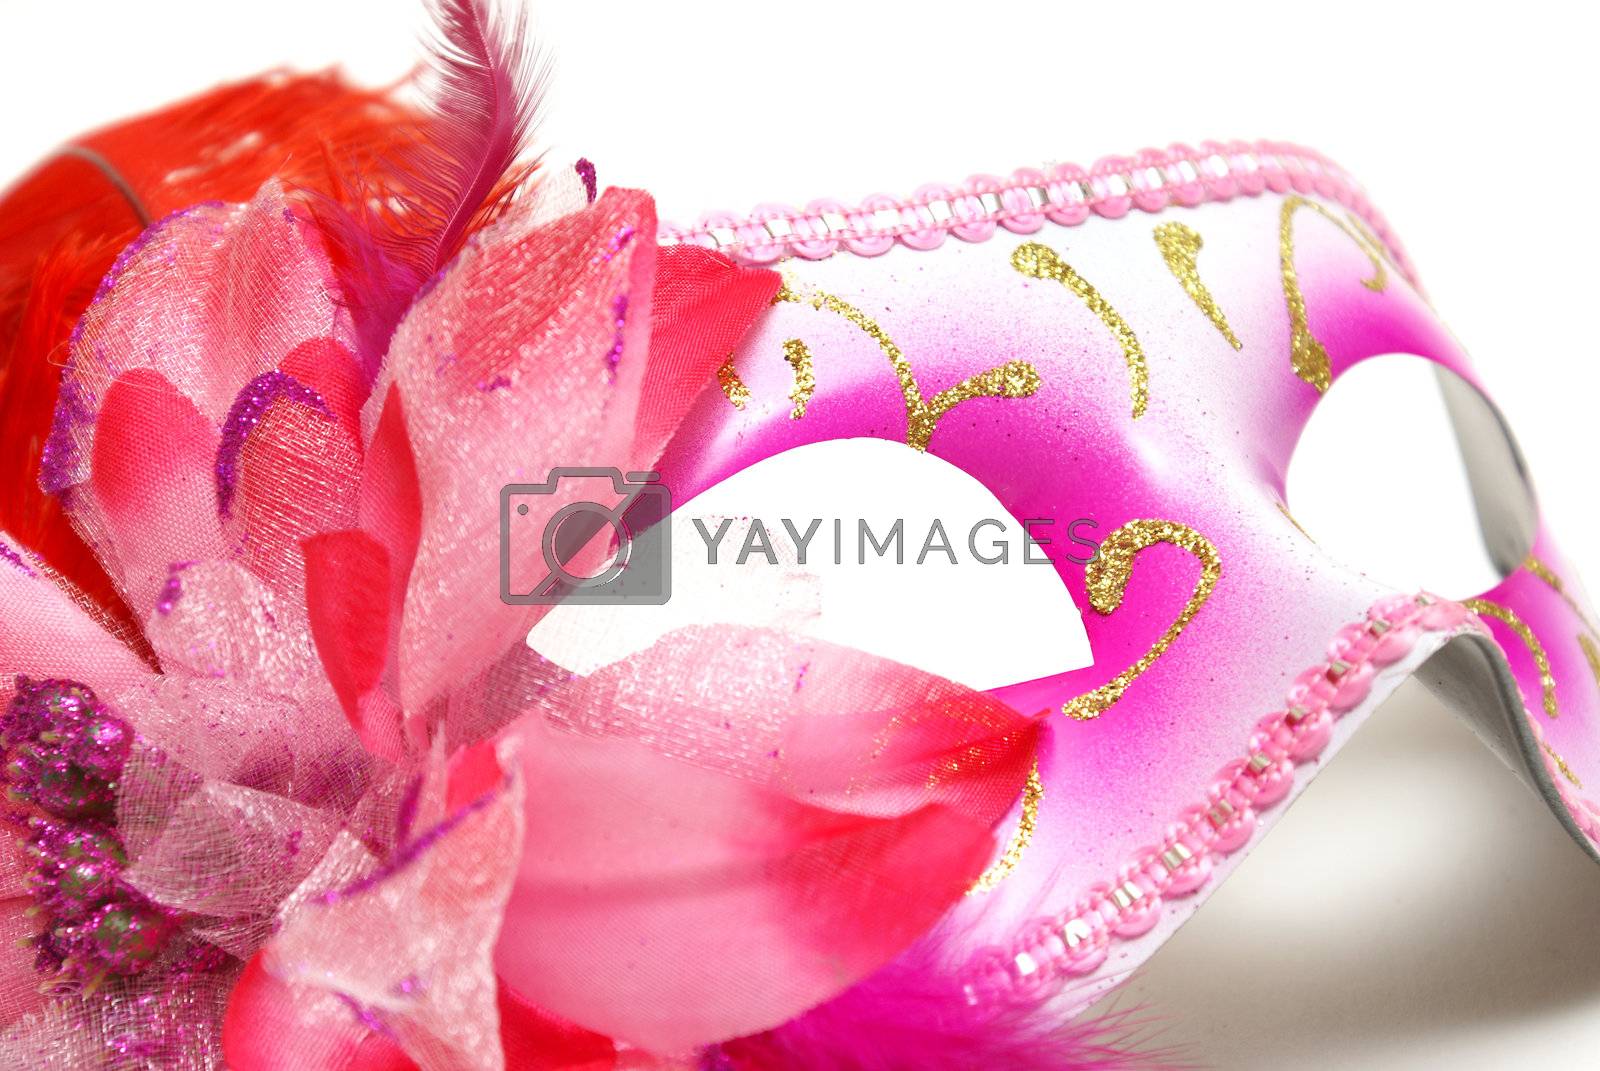 Royalty free image of Venetian Mask by AlphaBaby